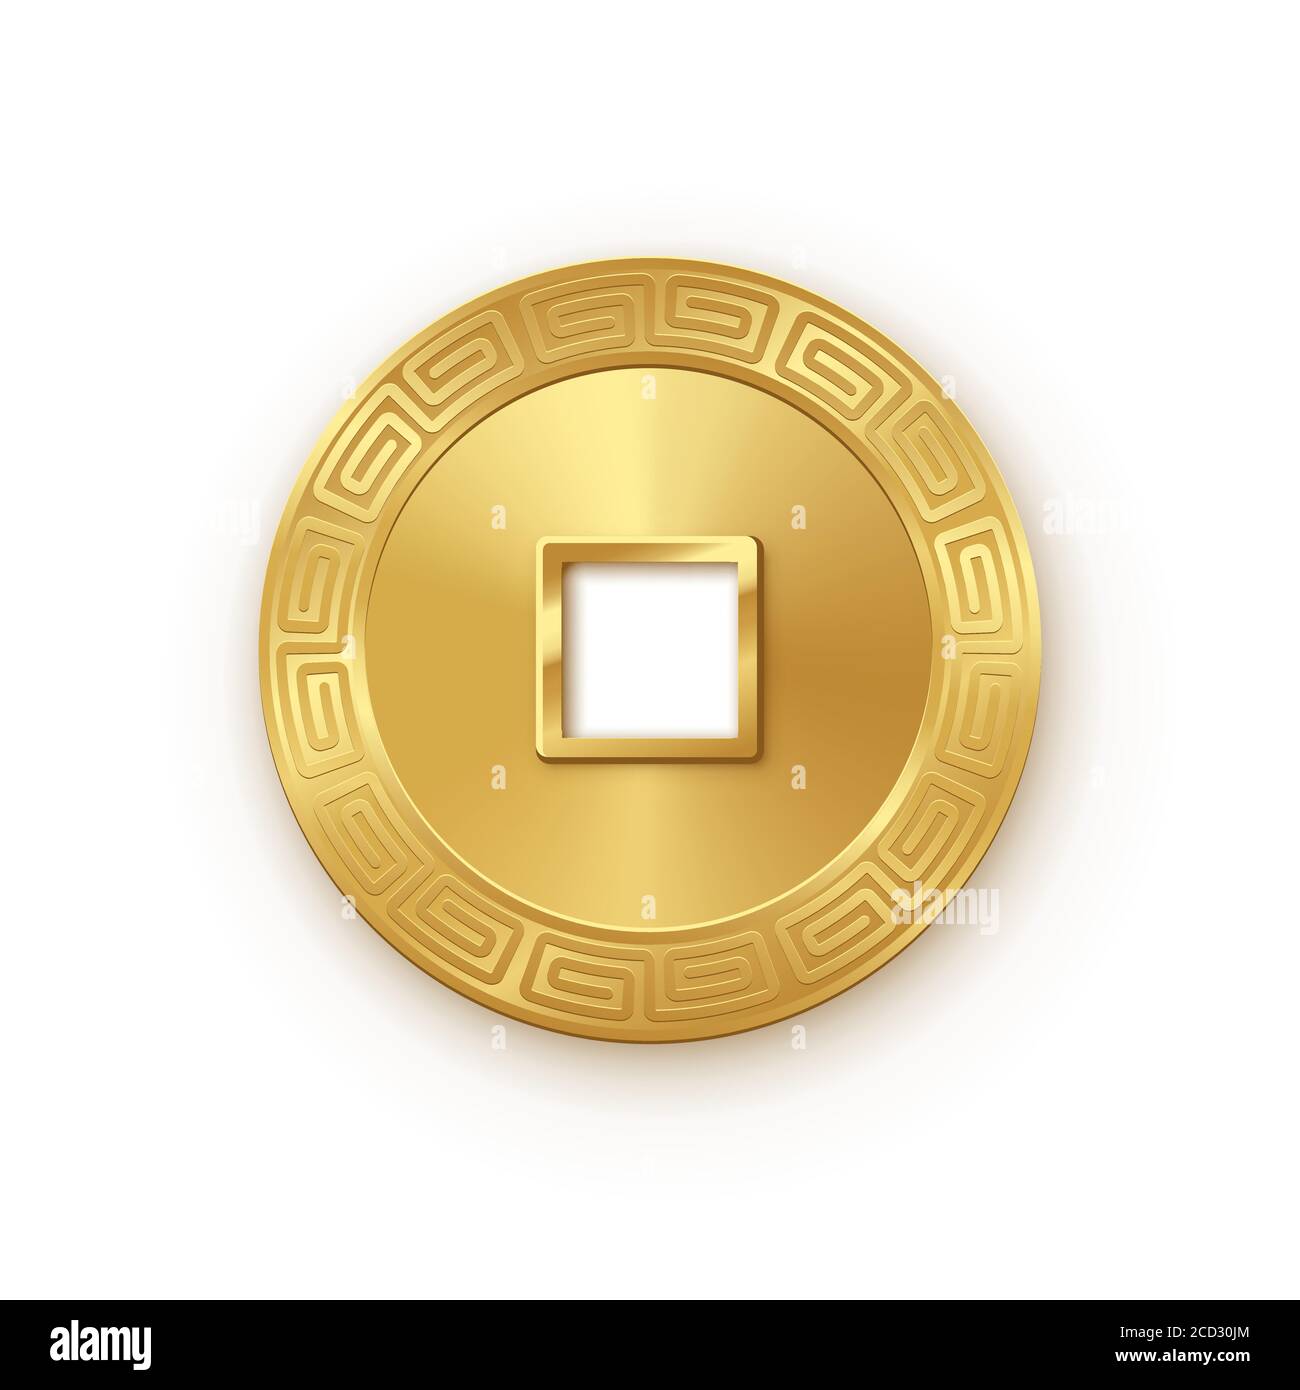 Shiny glowing realistic vector golden money coin china isolated on white background pattern. Magic gold oriental currency symbol object bringing Stock Vector